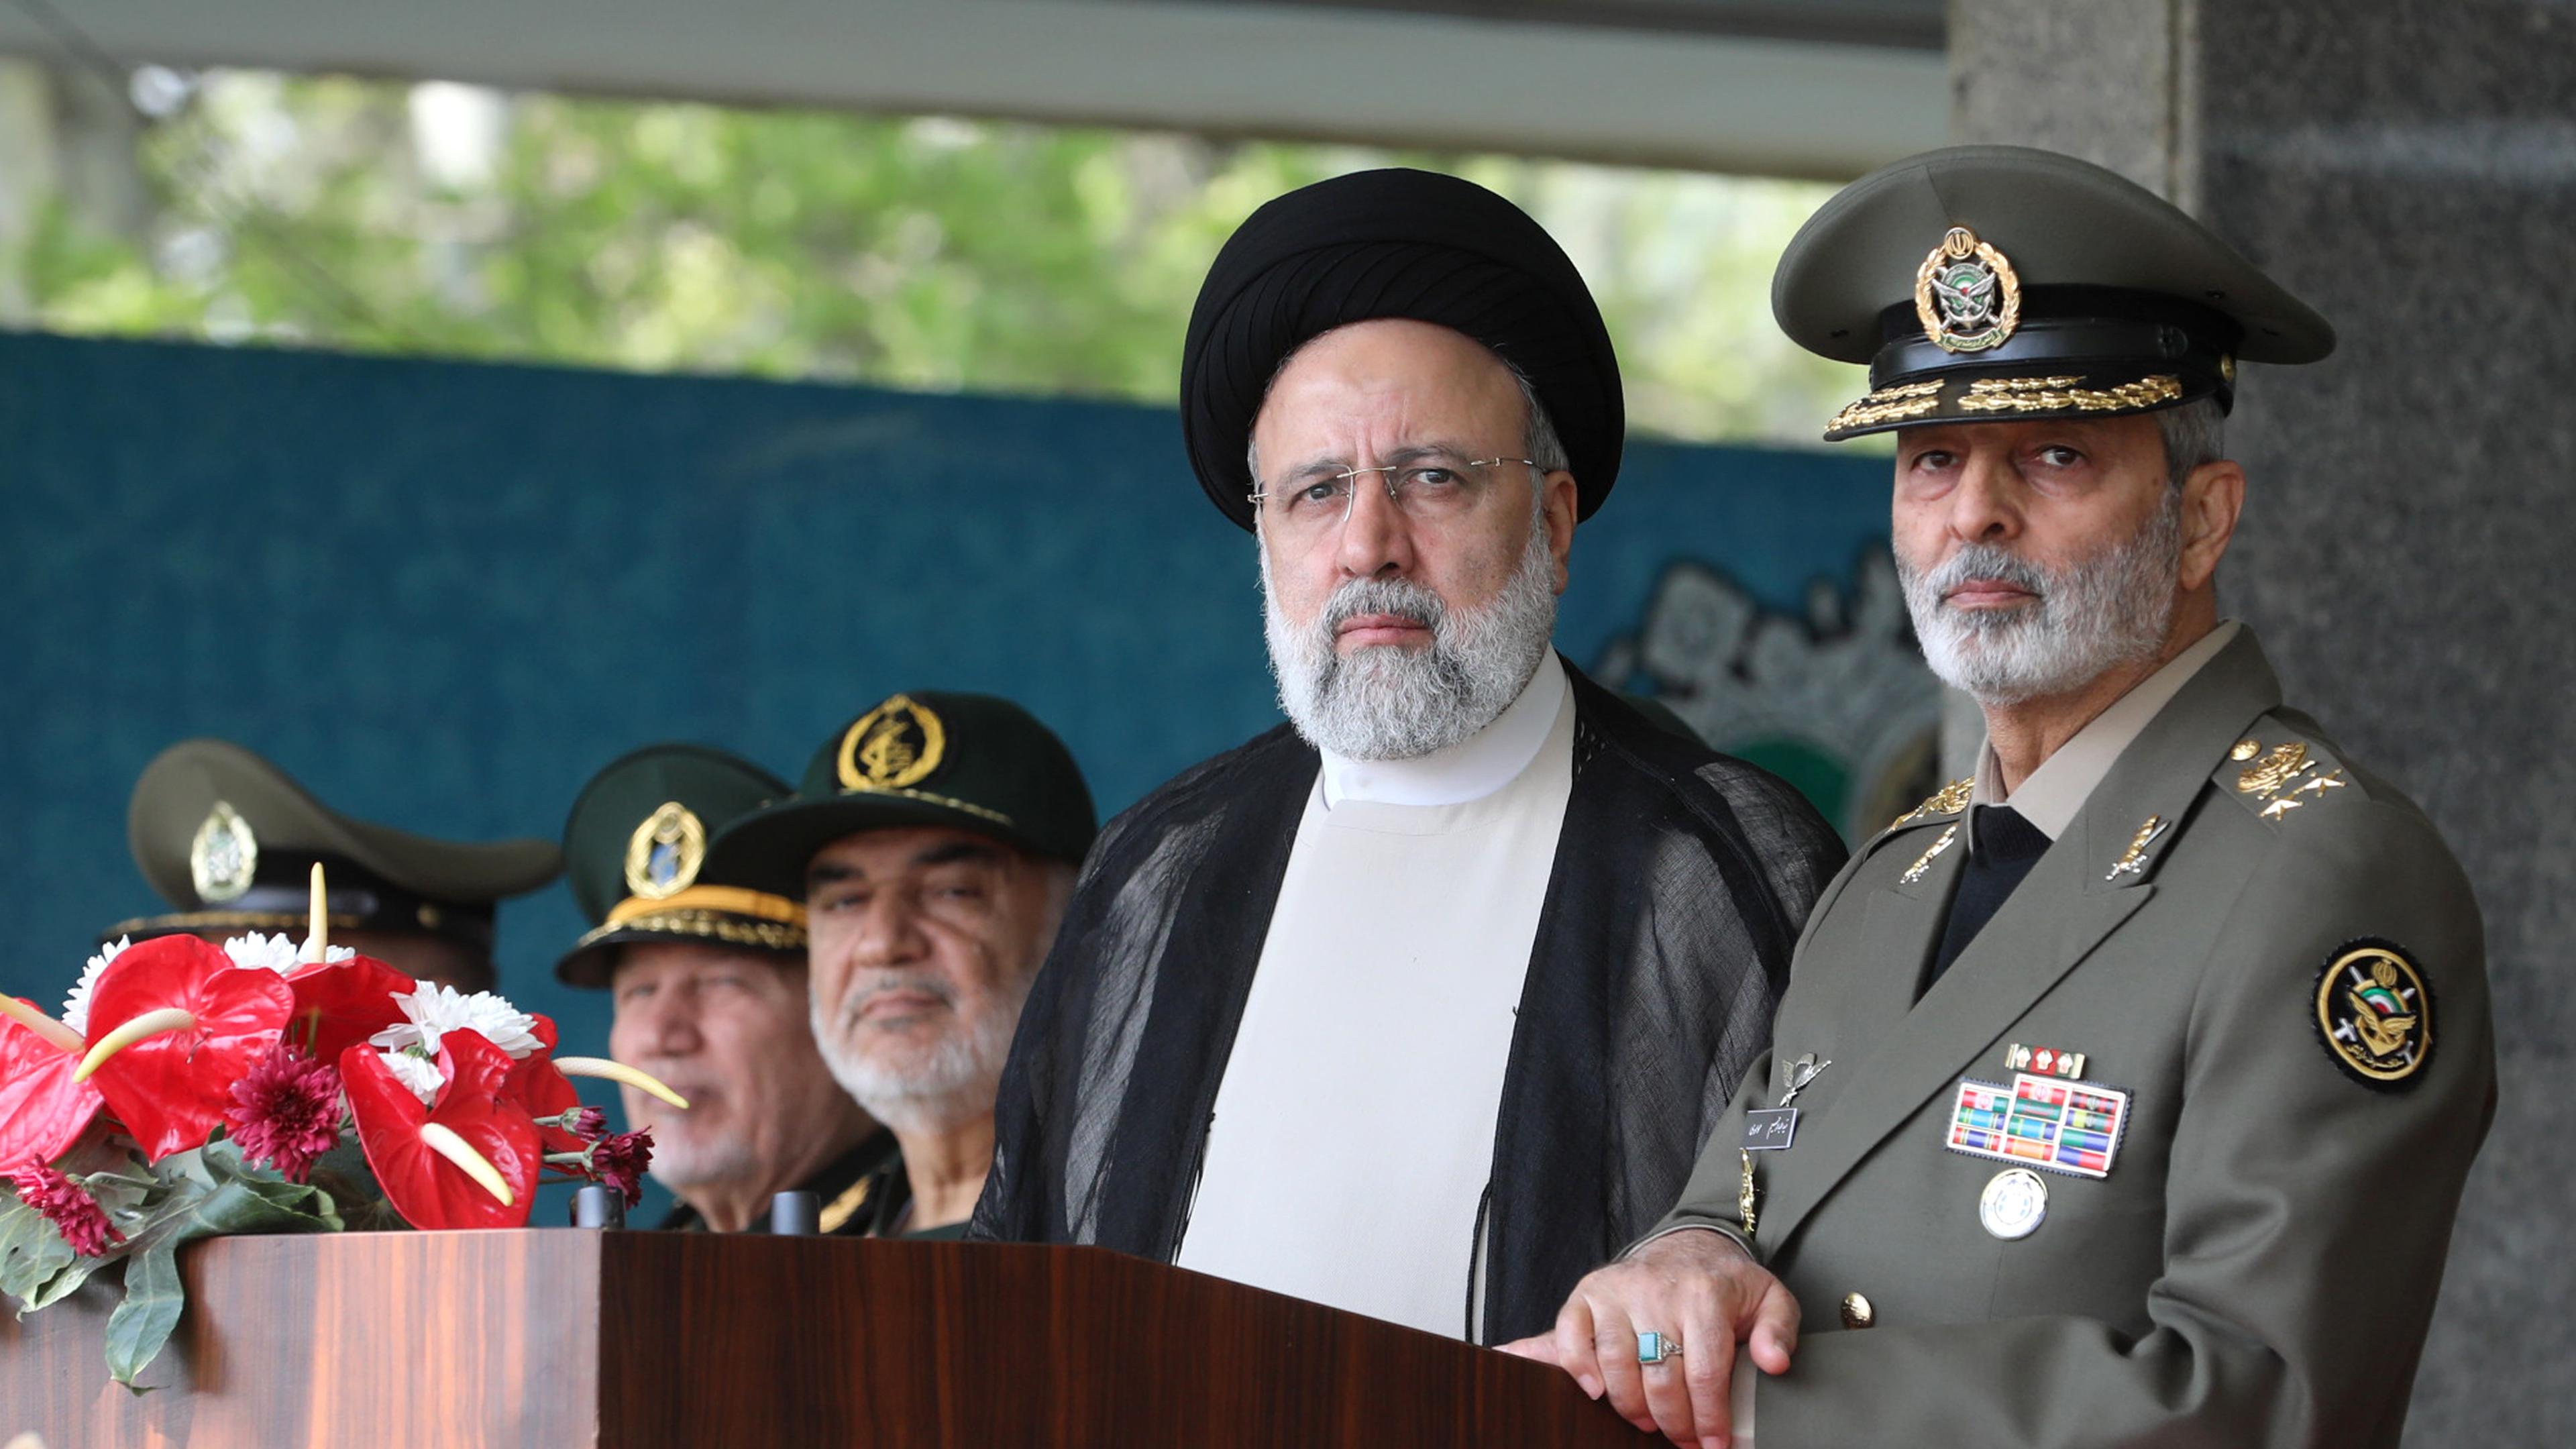 April 17: Iranian President Ebrahim Raisi (2nd from right) takes part in the Army Day parade at a military base in northern Tehran. Appearing at the parade, Raisi warned Israel against any military action against Iran.